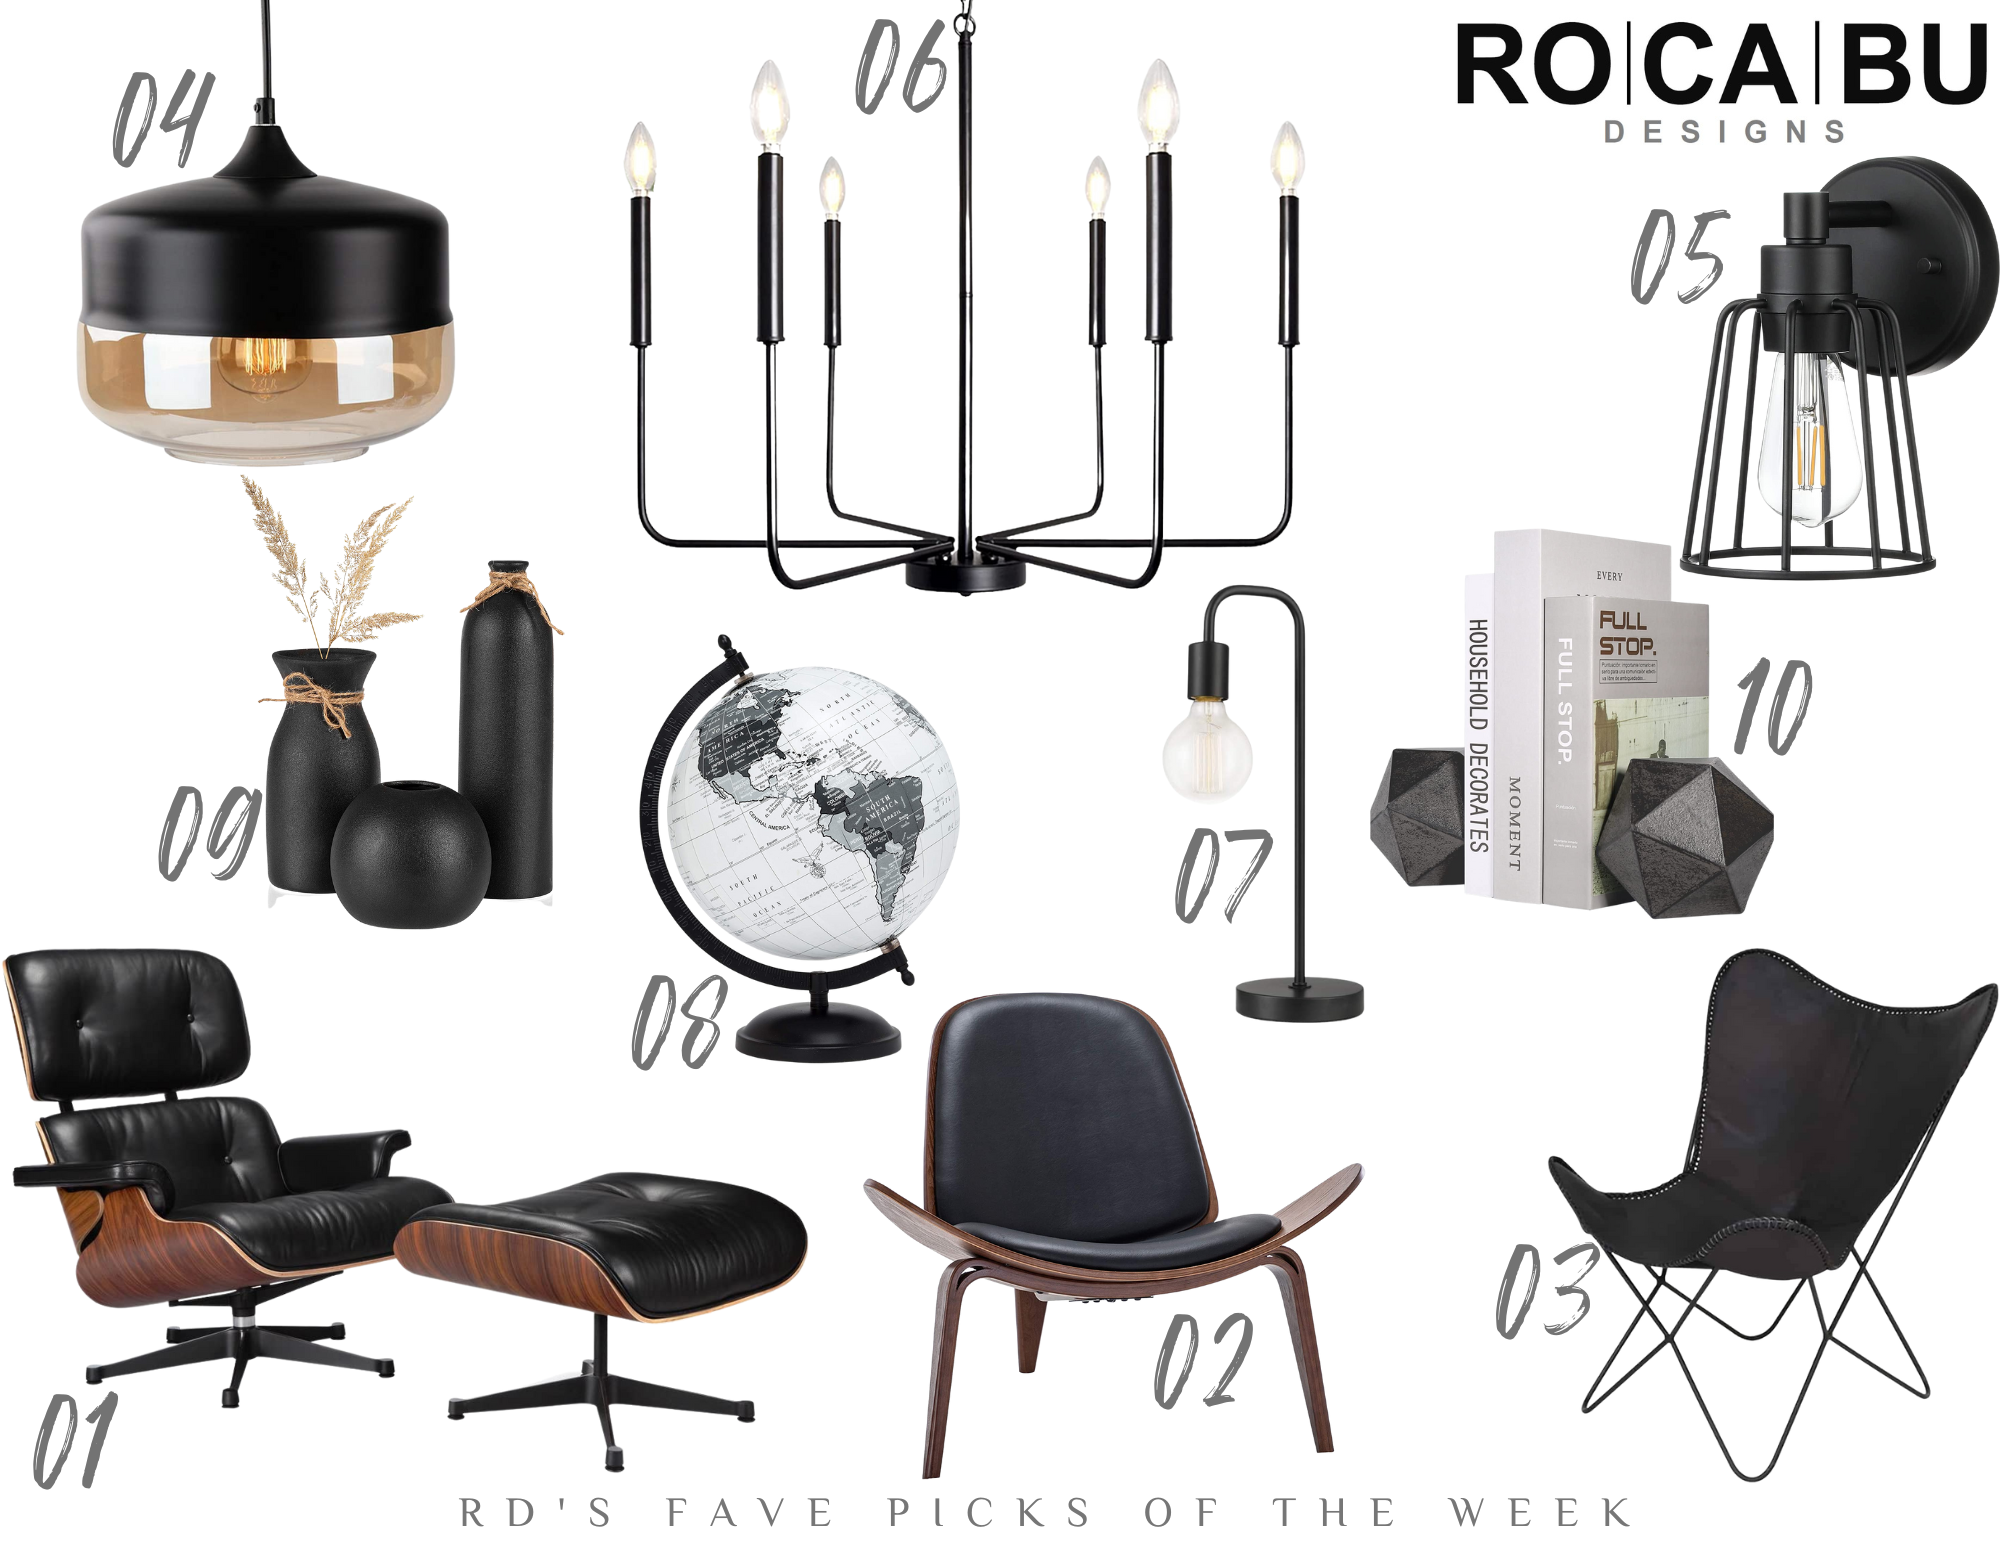 rocabu designs fave picks of the weeks which includes furniture, lighting and home decors